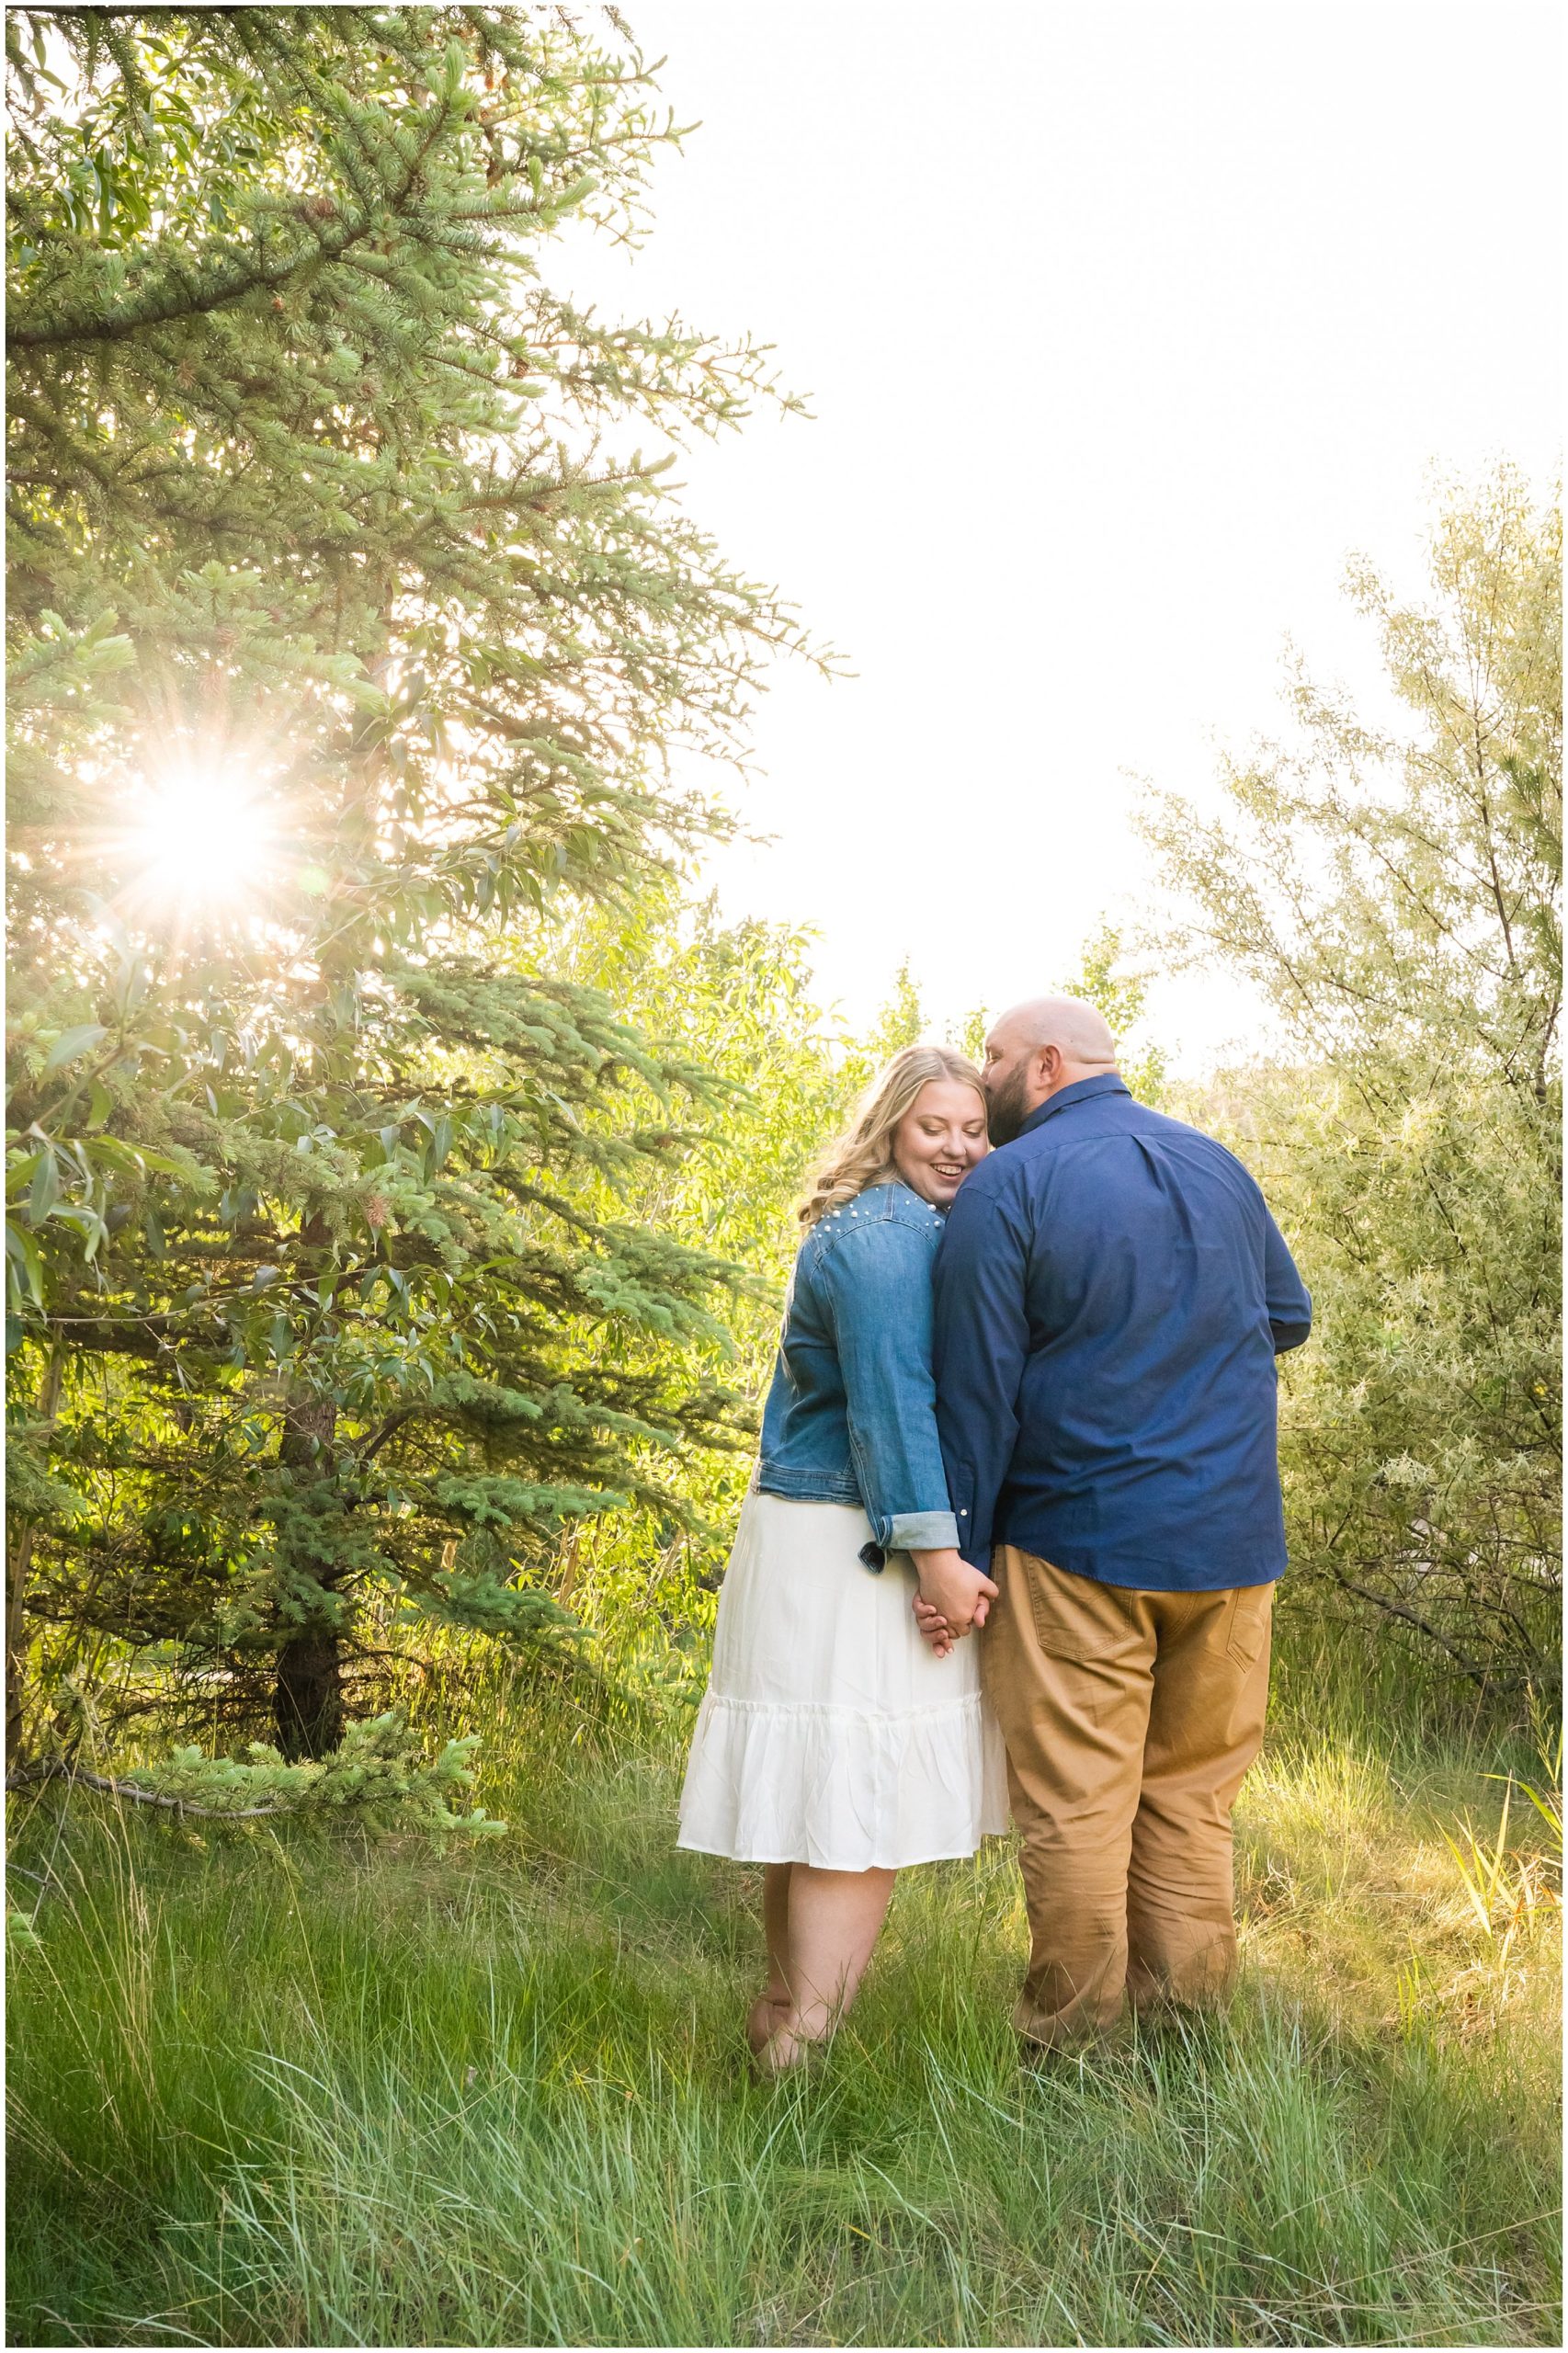 Couple in the mountains during Utah Mountain and Construction Site Engagement Session | Jessie and Dallin Photography